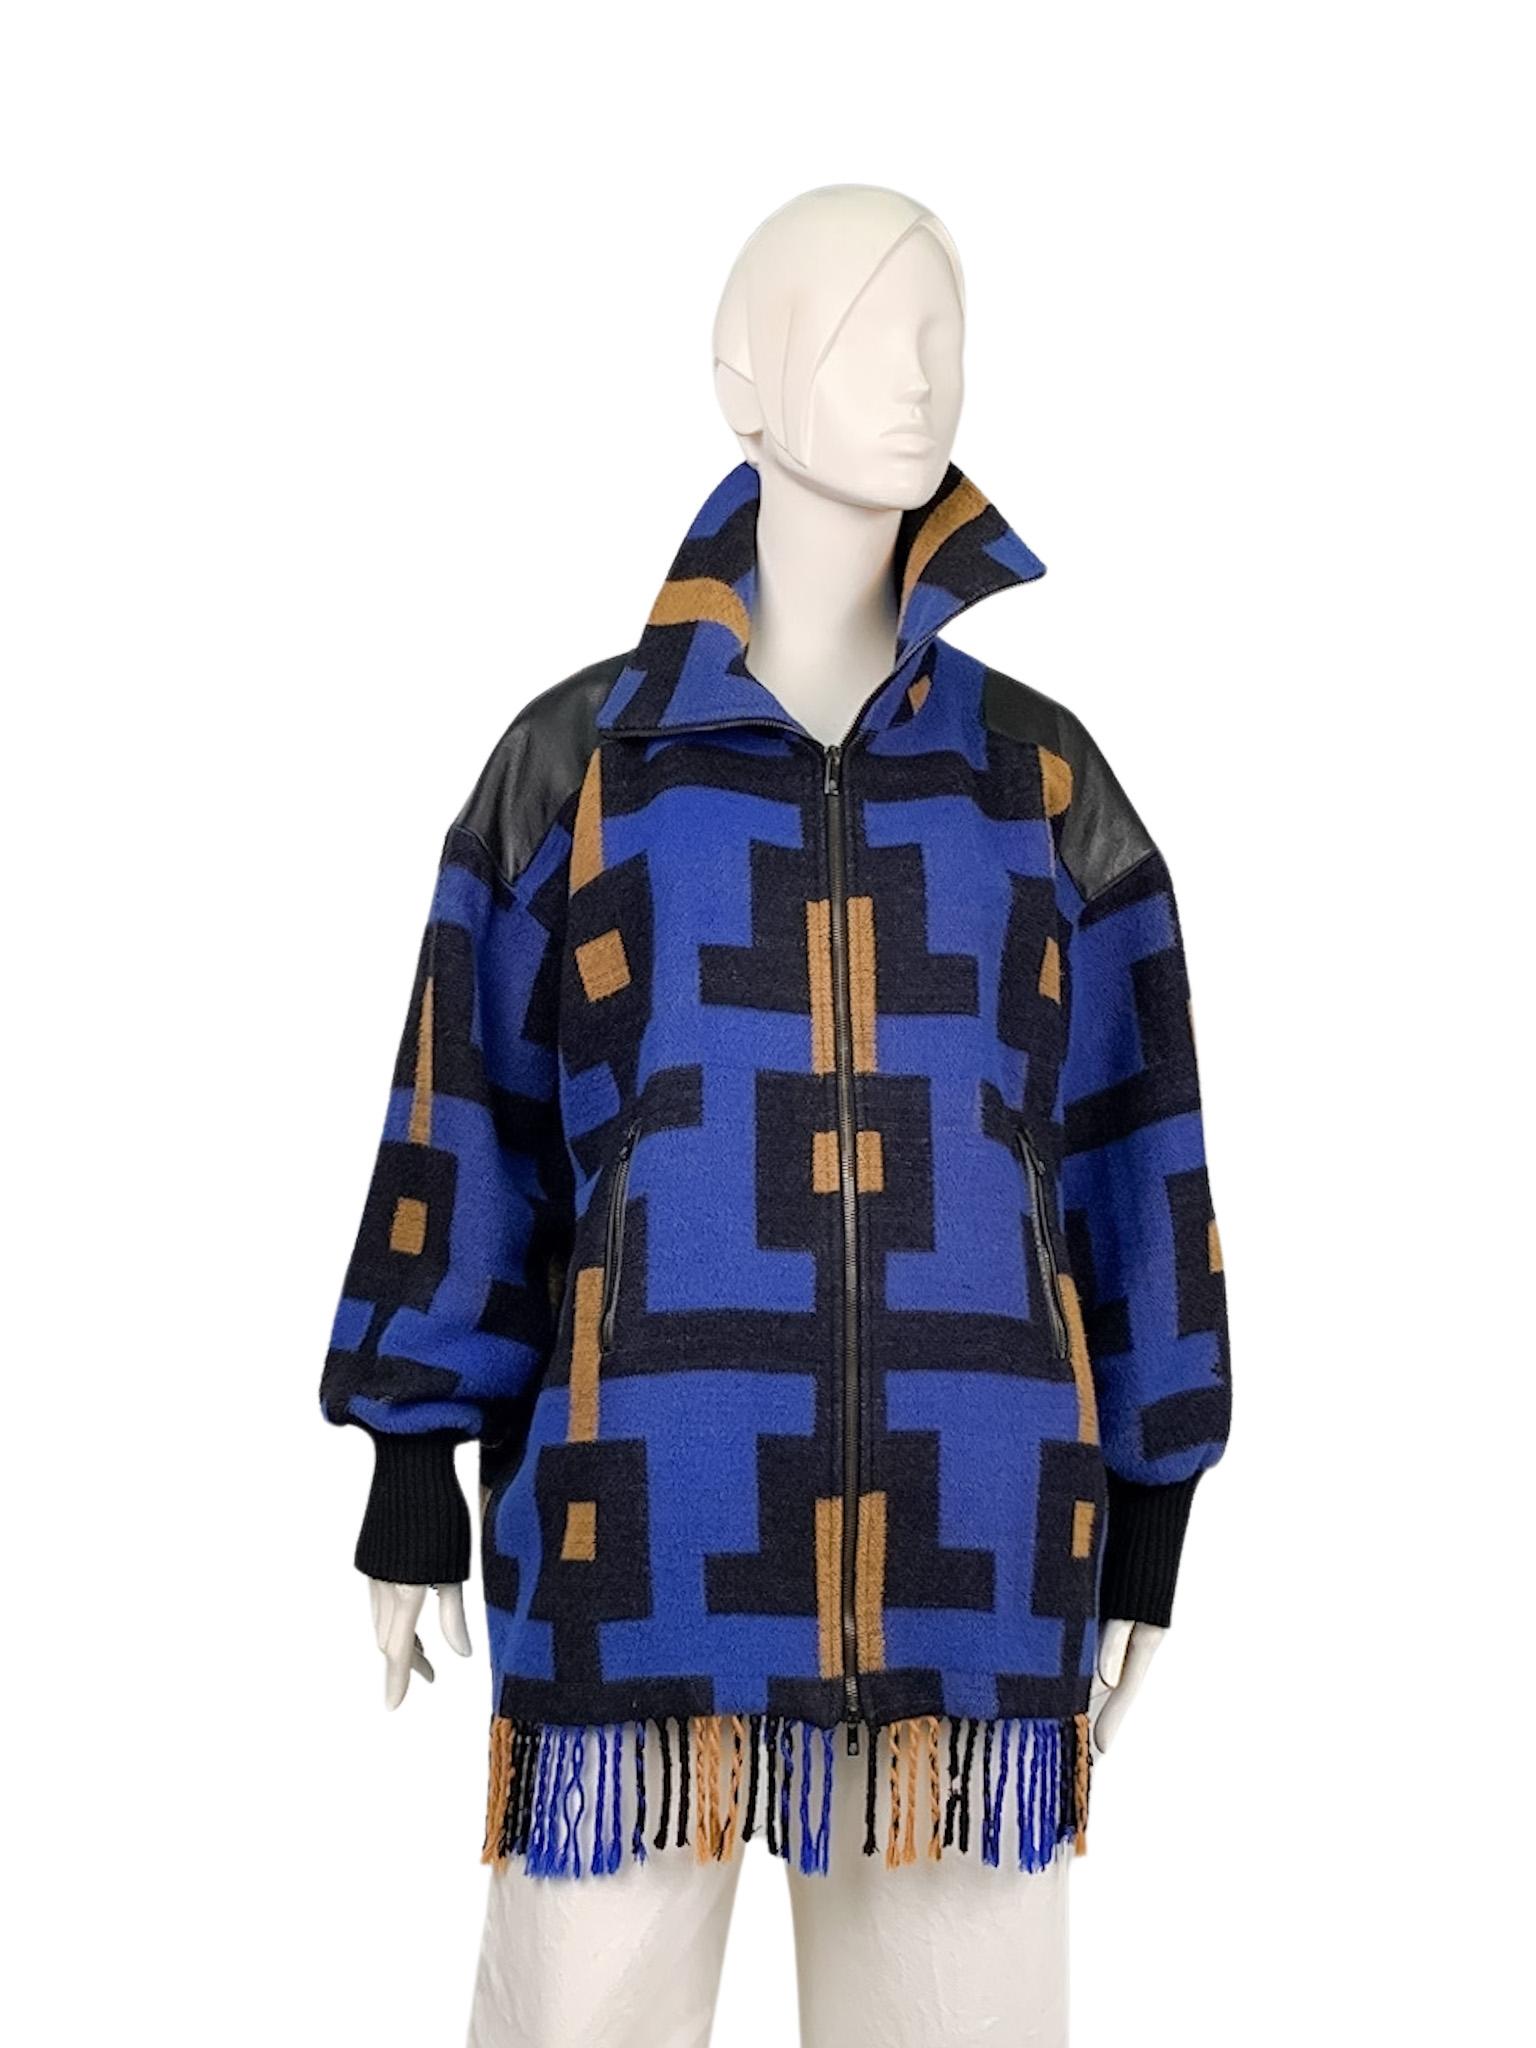 A compelling example of Catelbajac's whimsical and playful approach to fashion, this coat combines avant-guarde flair with practical casual design. Its oversized fit and the all-over graphic logo print make a bold statement, while the fringing adds